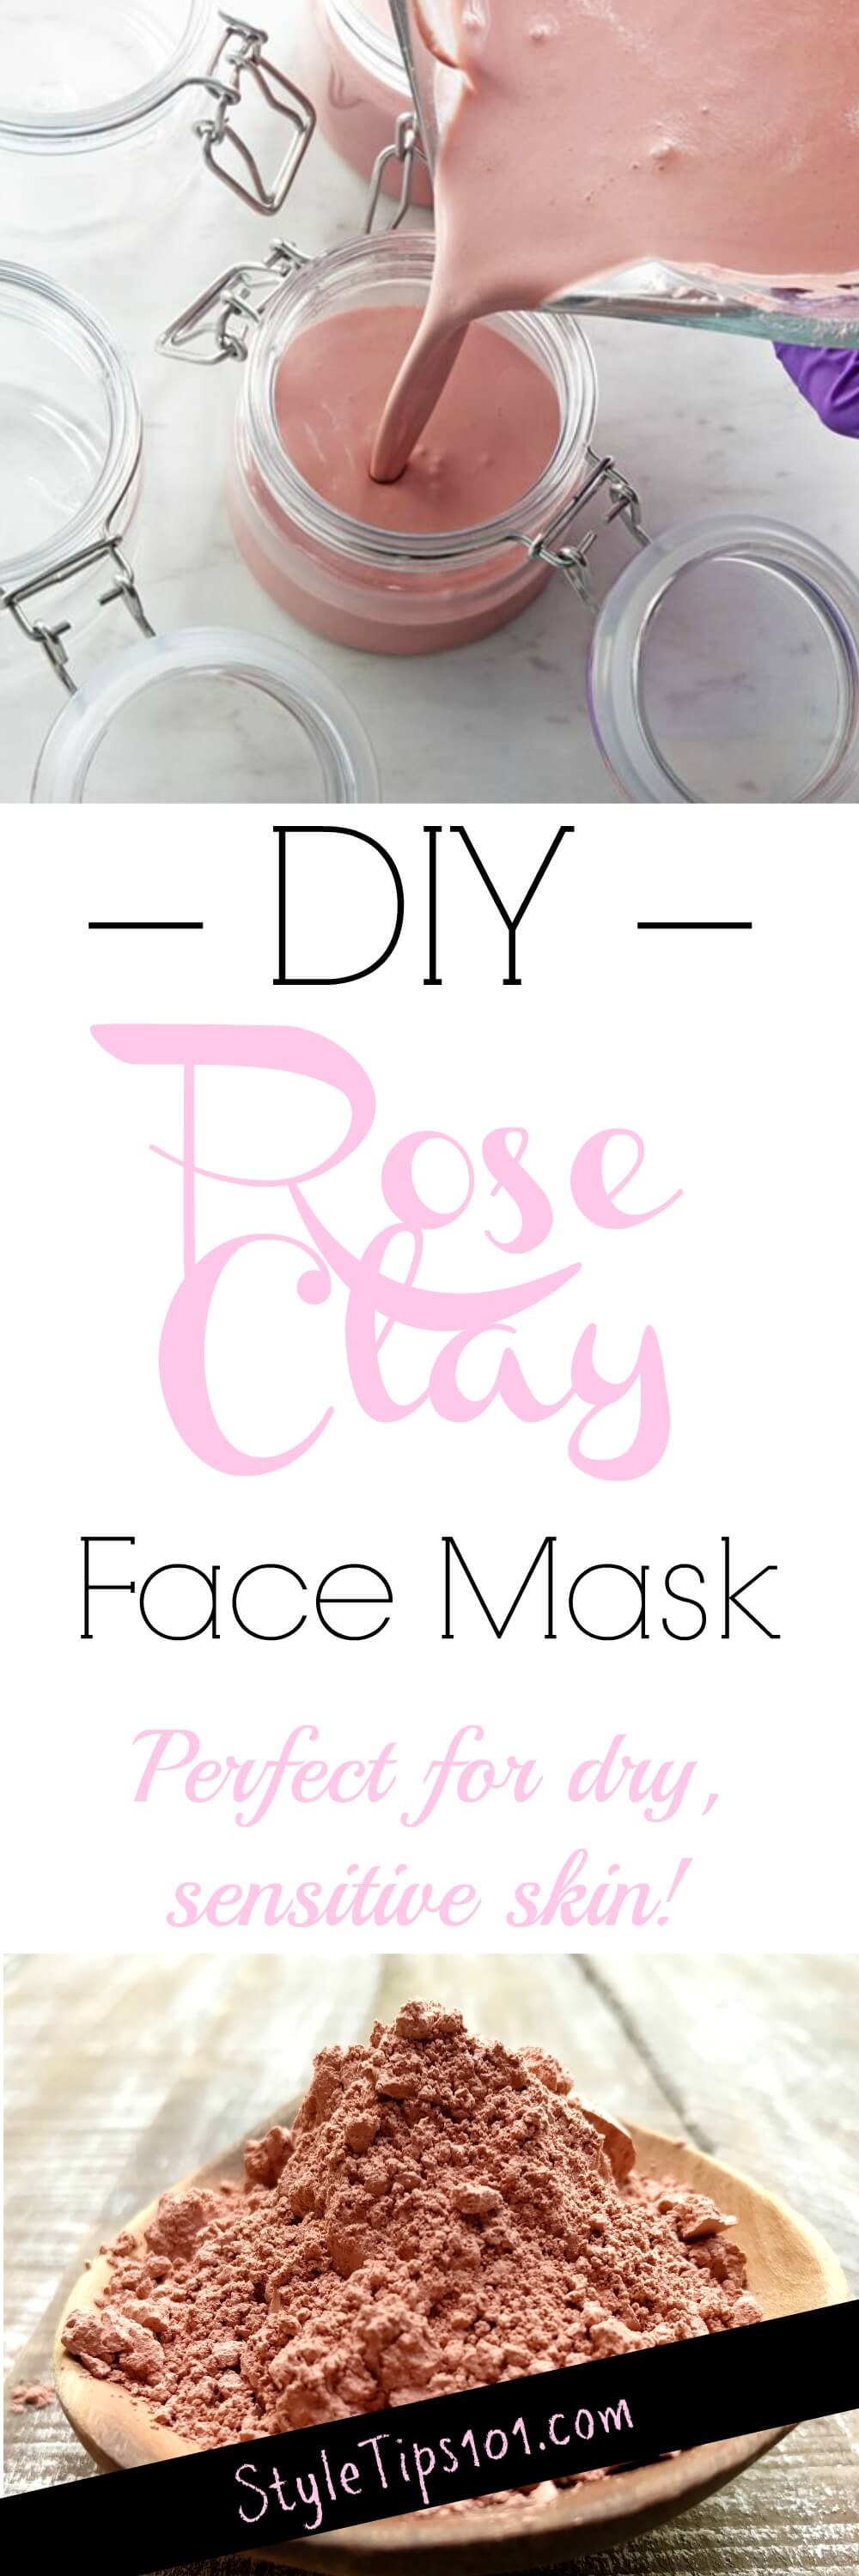 Rose Clay Benefits and Face Mask Recipe